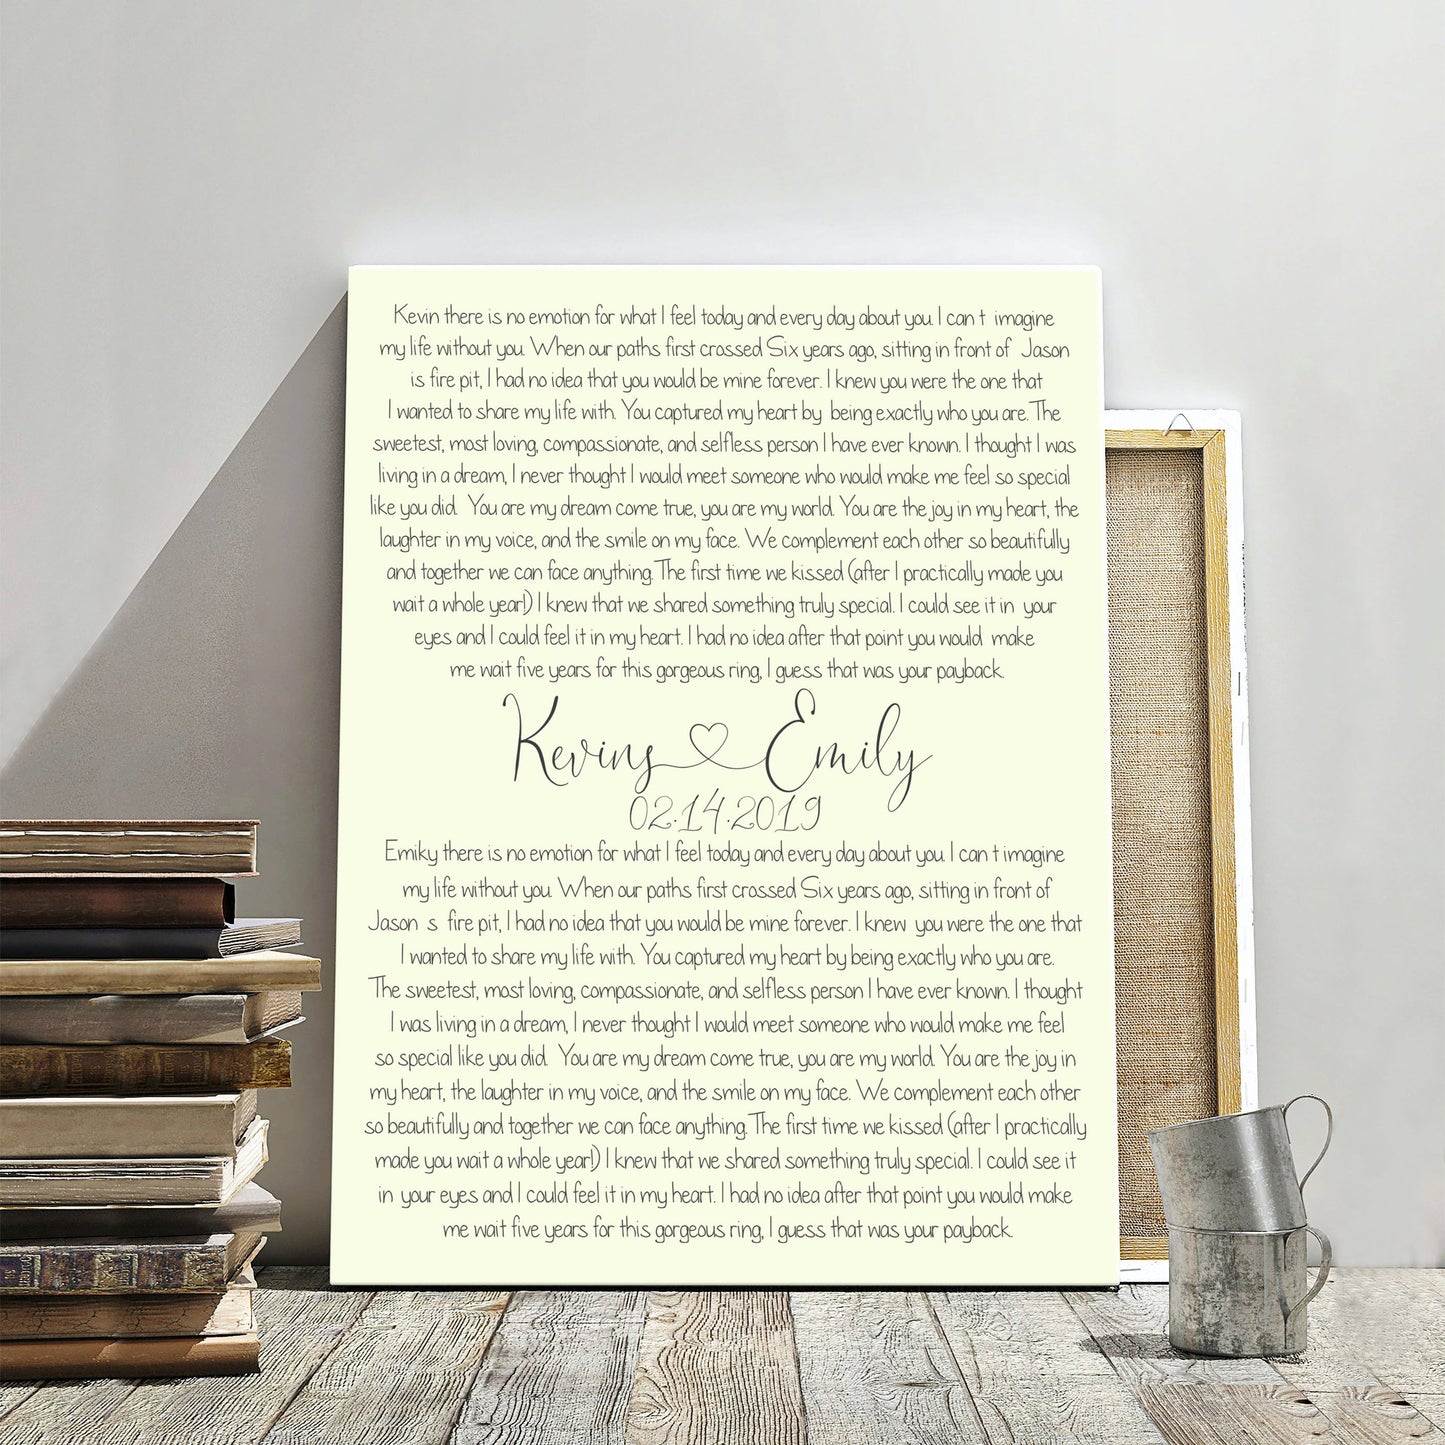 Vows on canvas, Canvas print vows, Framed vows canvas, Custom wall canvas, Canvas sign with vows, Anniversary gift, Christmas gift